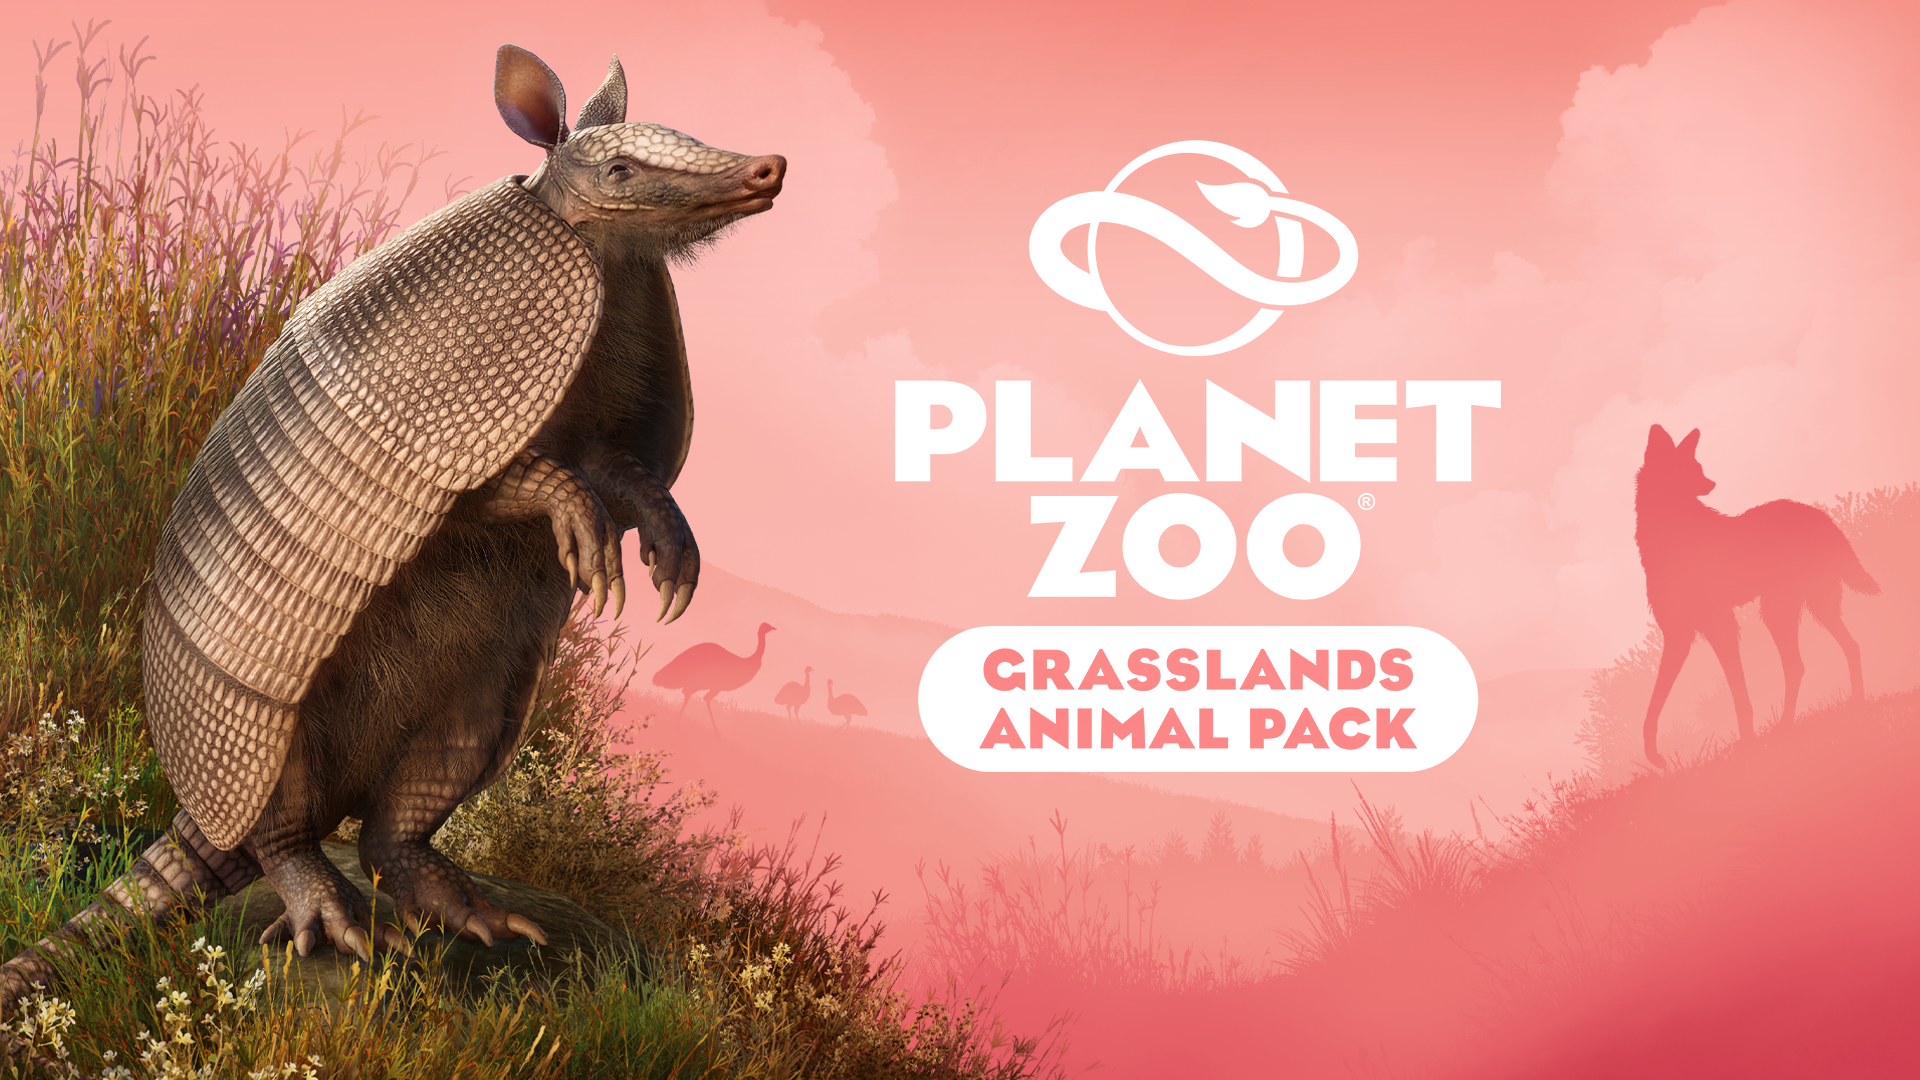 Planet Zoo: Grasslands Animal Pack adds eight new animals